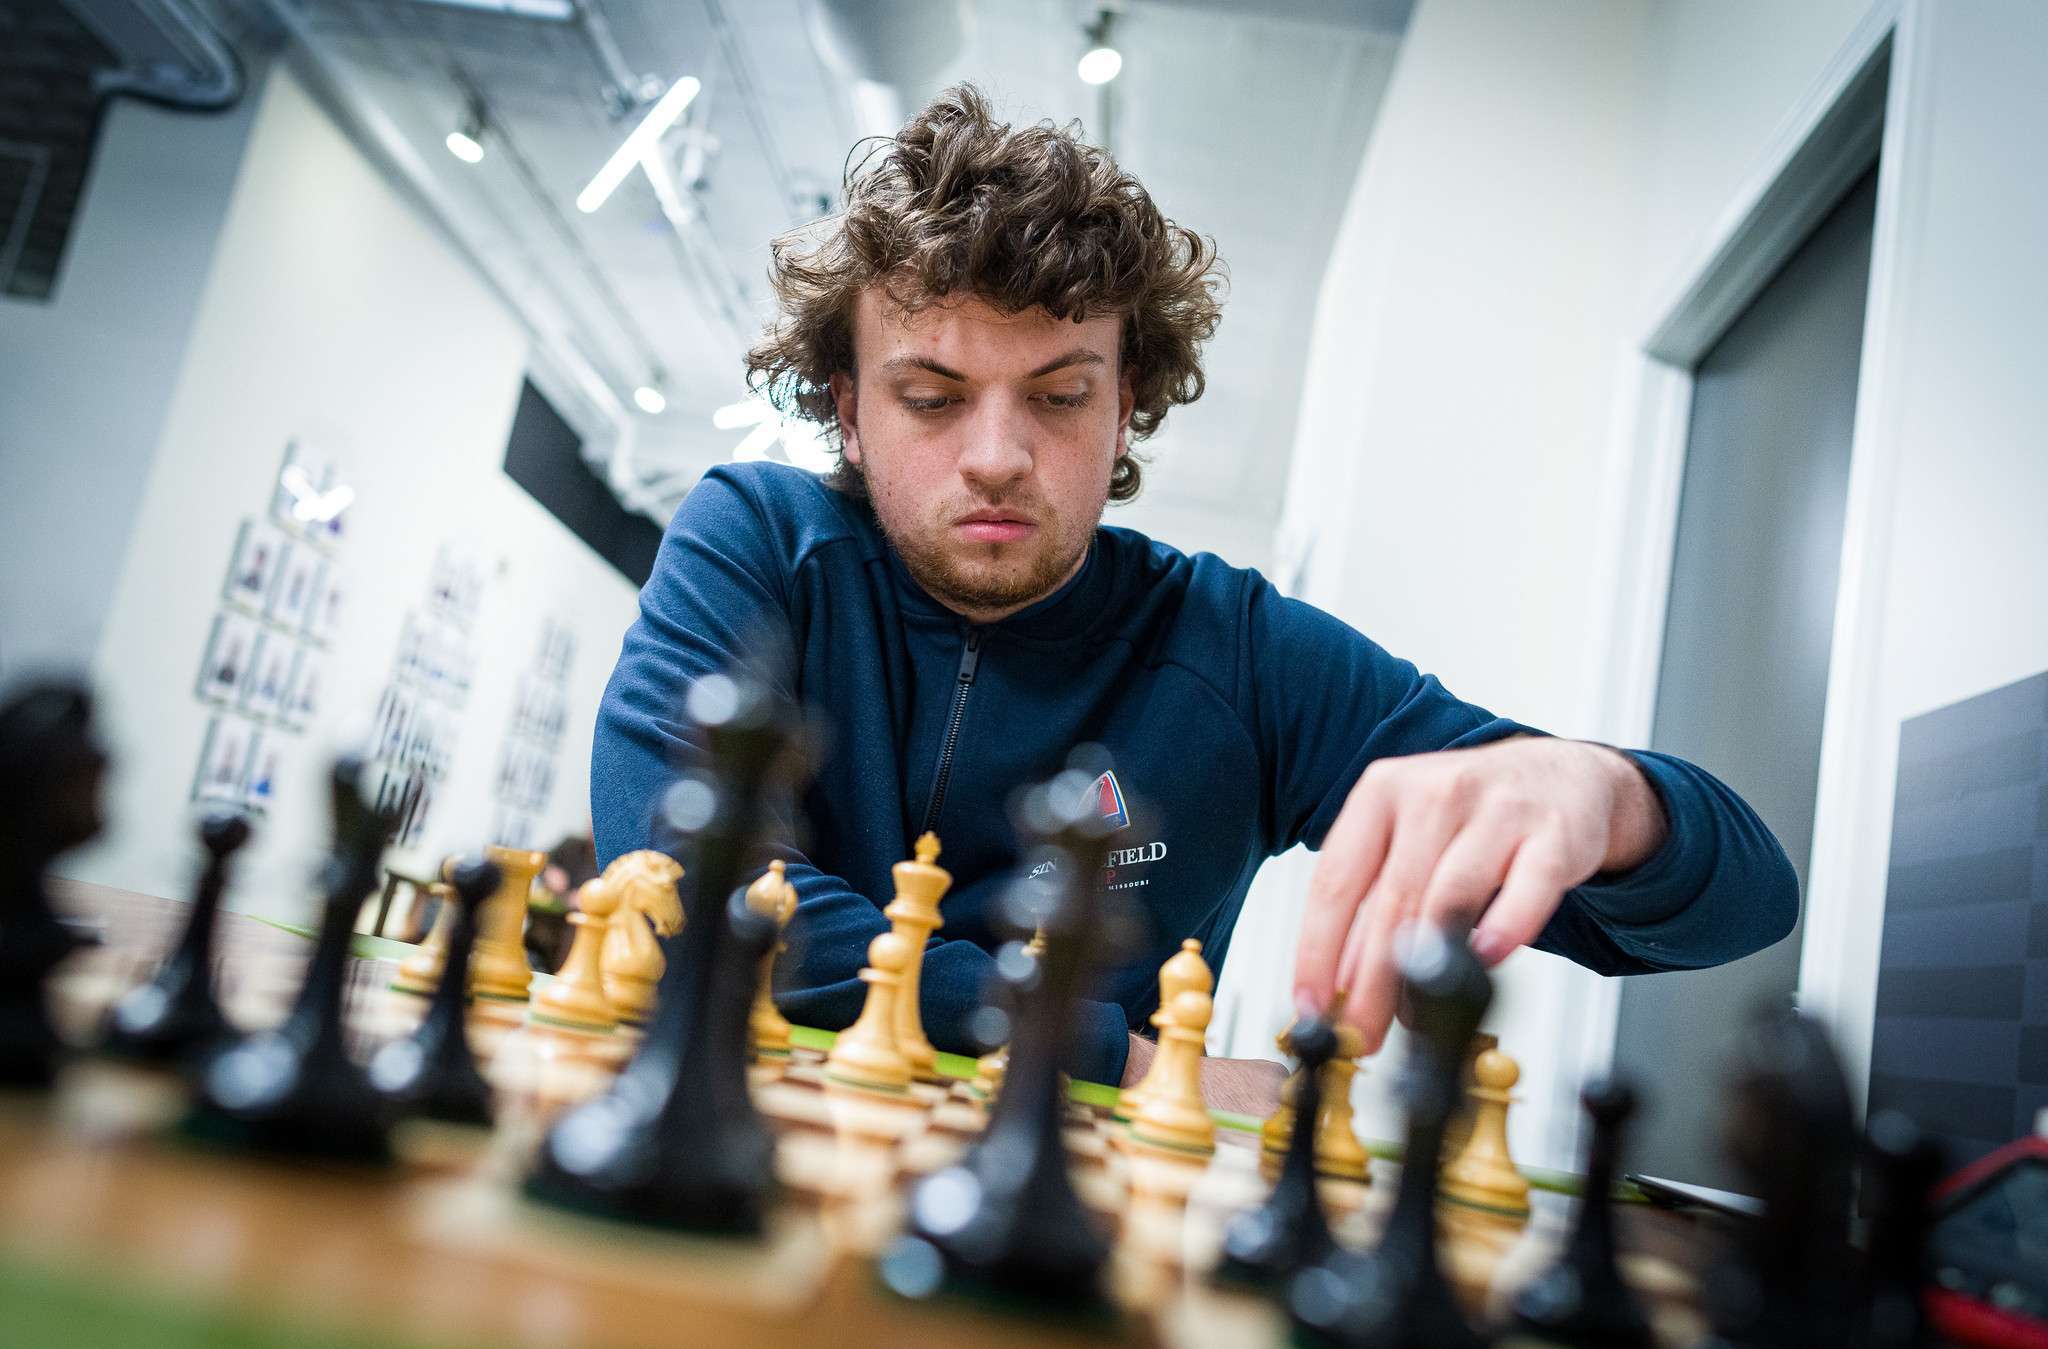 Hans Niemann scored 7½/9 points to win the Uralsk Open 2023 in Kazakhstan.  He finished a full point ahead of a five-player chasing pack…